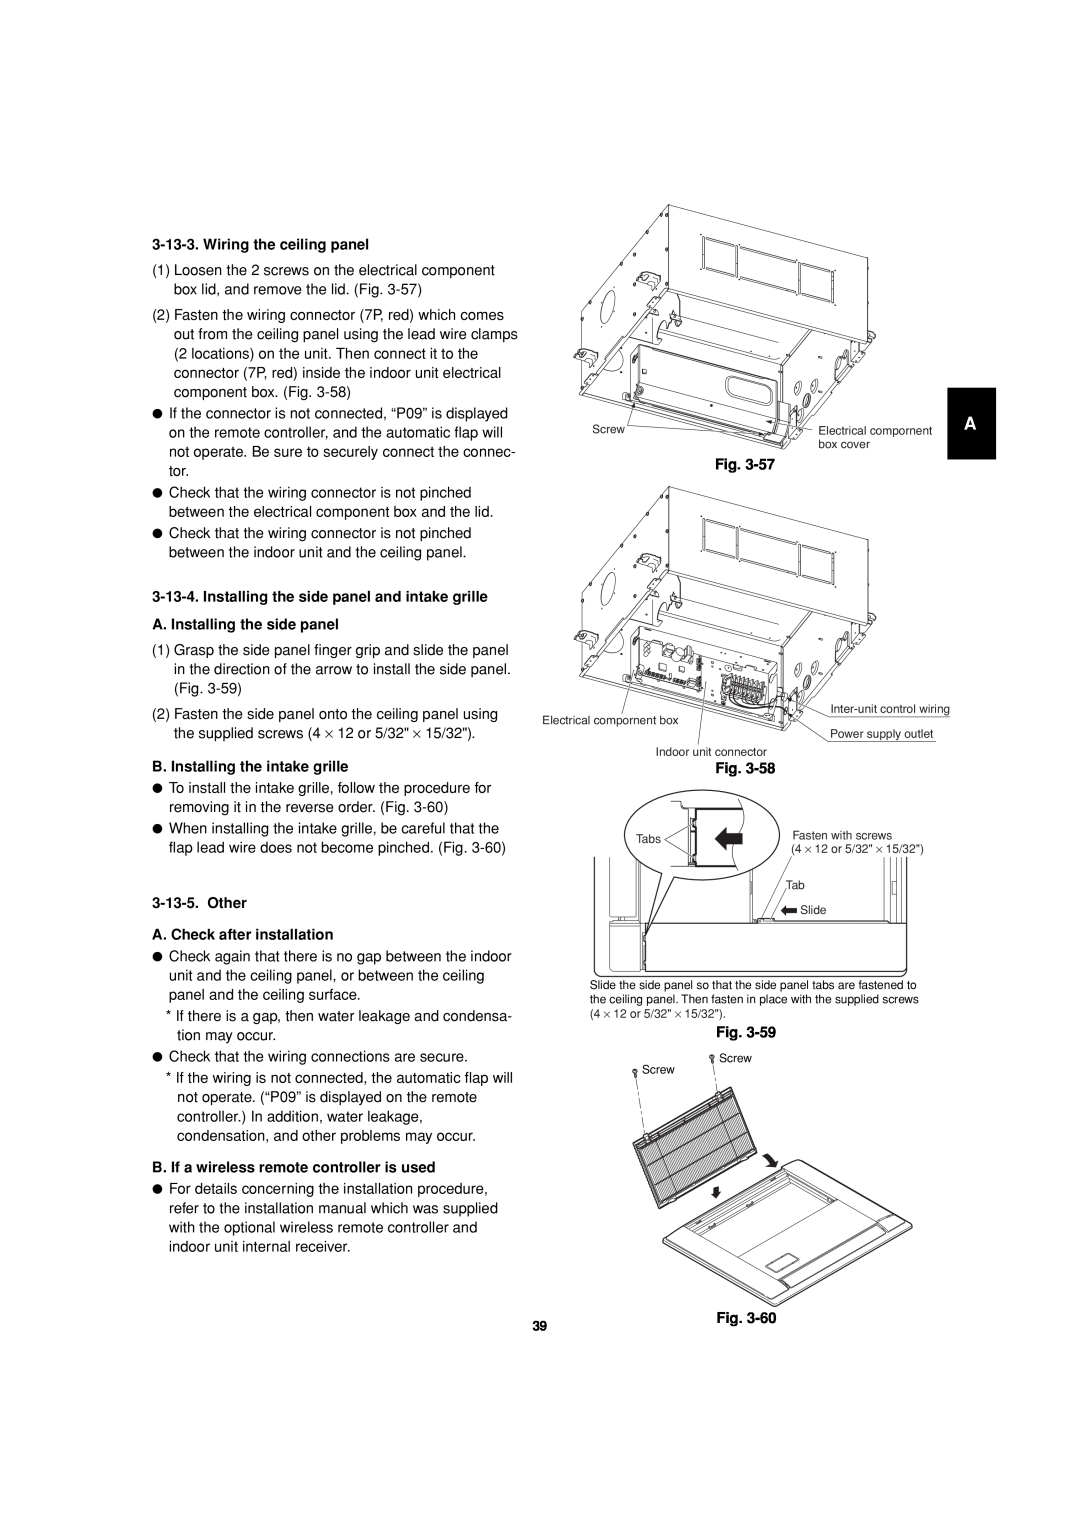 Sanyo 85464359981002 Wiring the ceiling panel, A. Installing the side panel, B. Installing the intake grille, Fig 